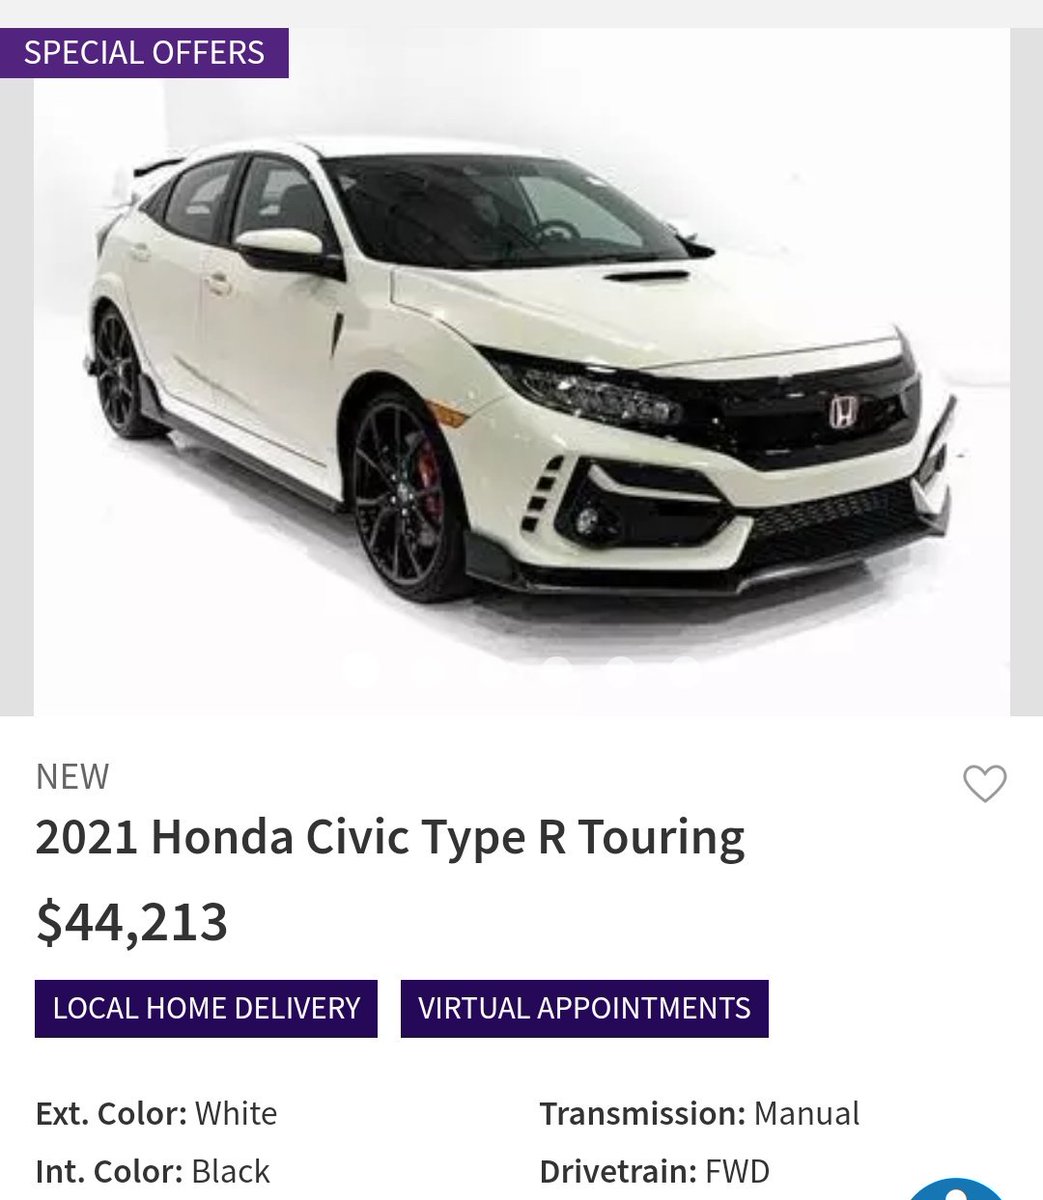 I am going to give you 4 similarly priced vehicles: an American, a German, a Korean and a Japanese vehicle. Please take time to look over each of them and the asking price.